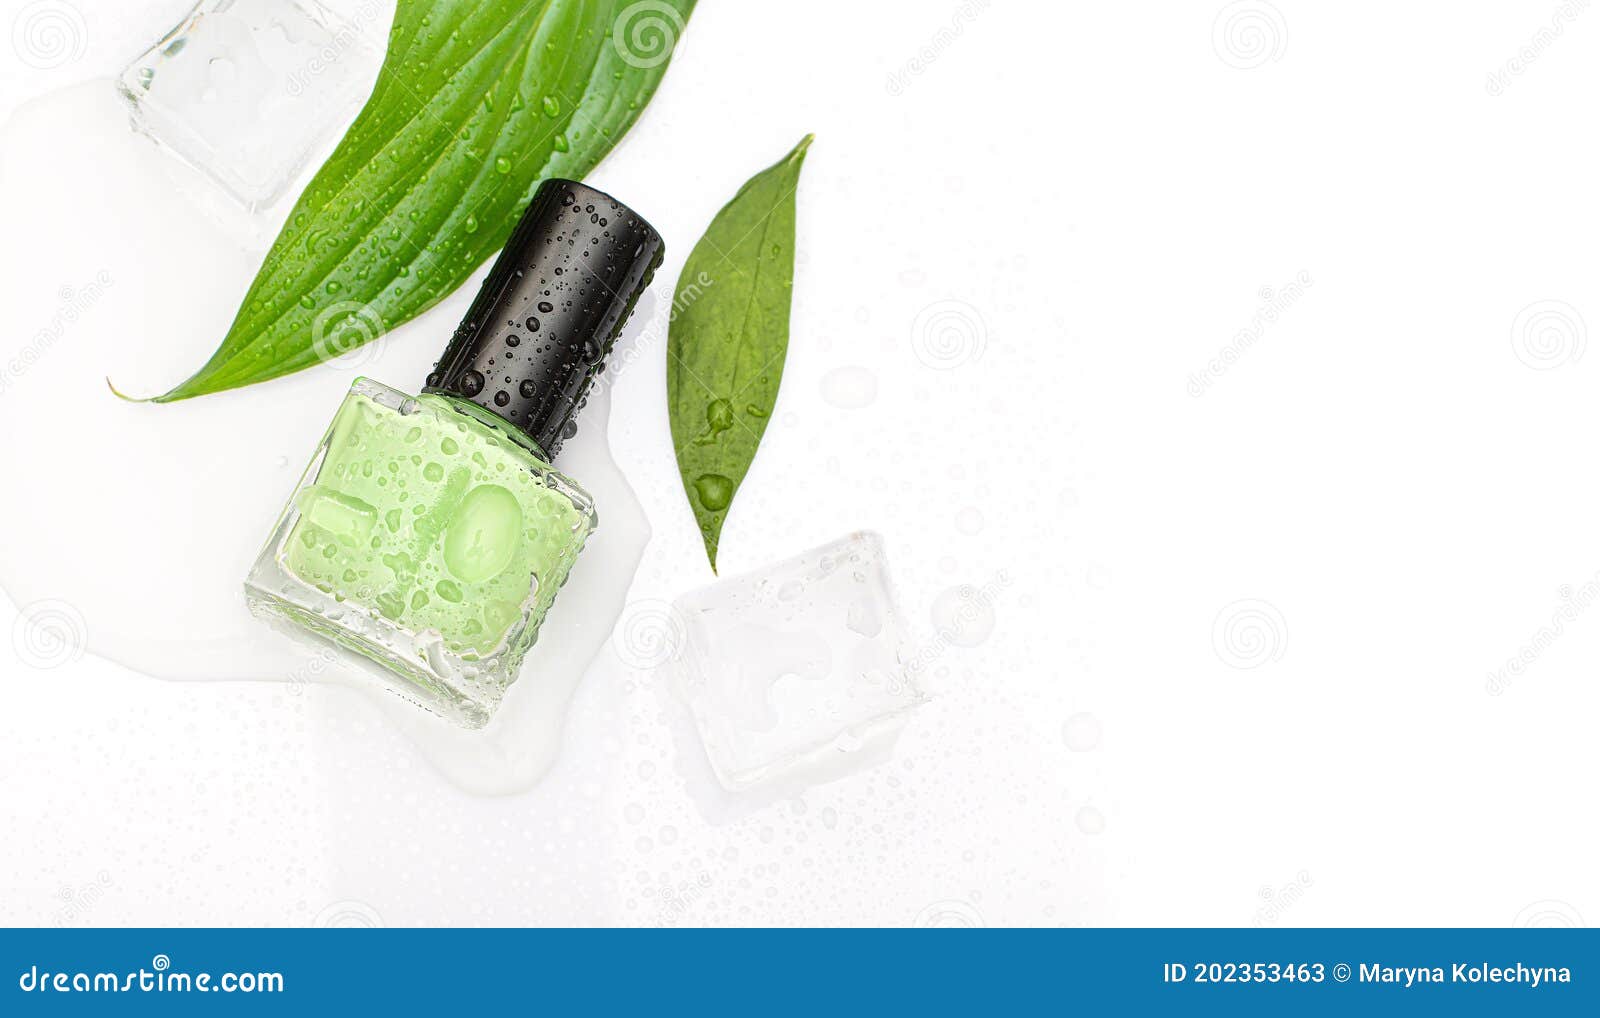 White and Green Nail Art Ideas - wide 5